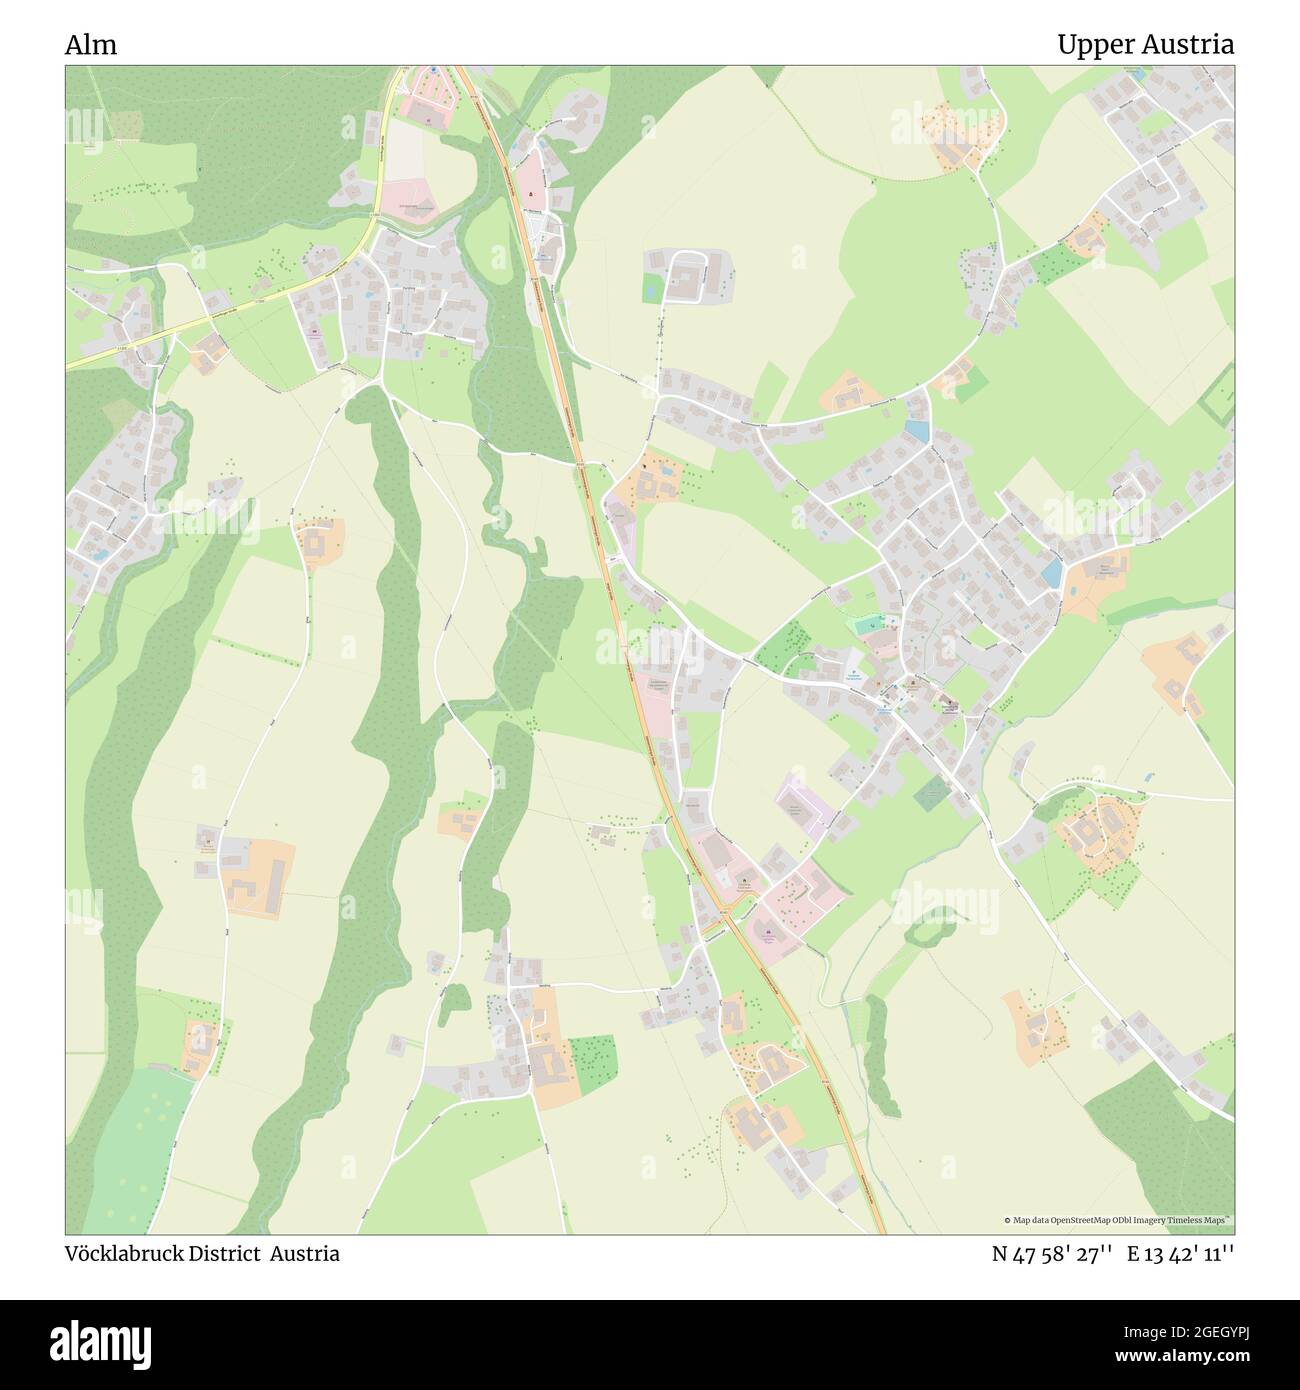 Alm, Vöcklabruck District, Austria, Upper Austria, N 47 58' 27'', E 13 42' 11'', map, Timeless Map published in 2021. Travelers, explorers and adventurers like Florence Nightingale, David Livingstone, Ernest Shackleton, Lewis and Clark and Sherlock Holmes relied on maps to plan travels to the world's most remote corners, Timeless Maps is mapping most locations on the globe, showing the achievement of great dreams Stock Photo